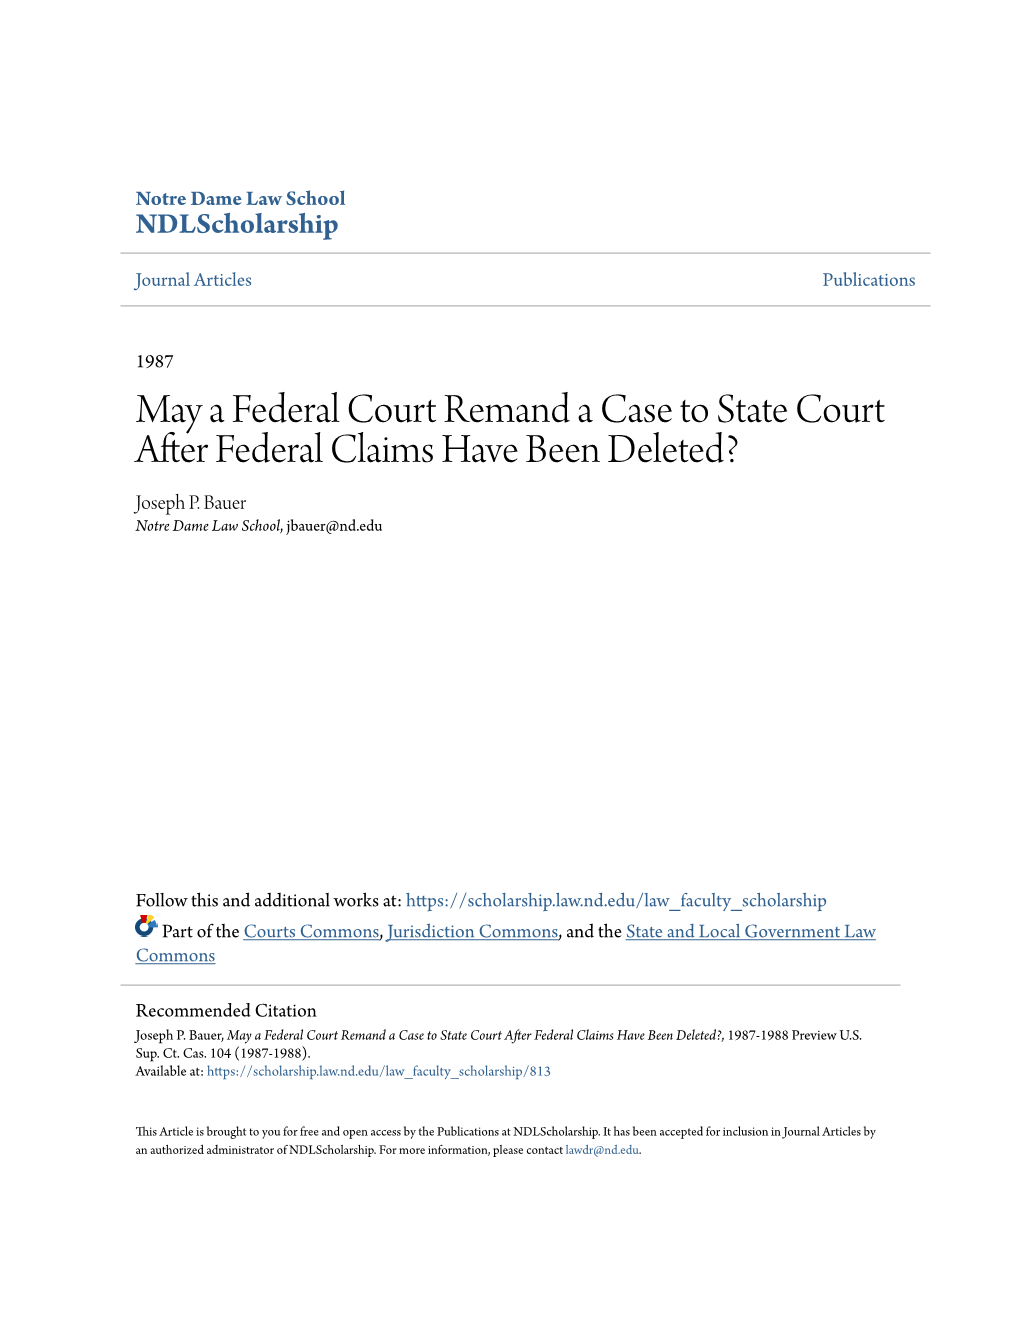 May a Federal Court Remand a Case to State Court After Federal Claims Have Been Deleted? Joseph P